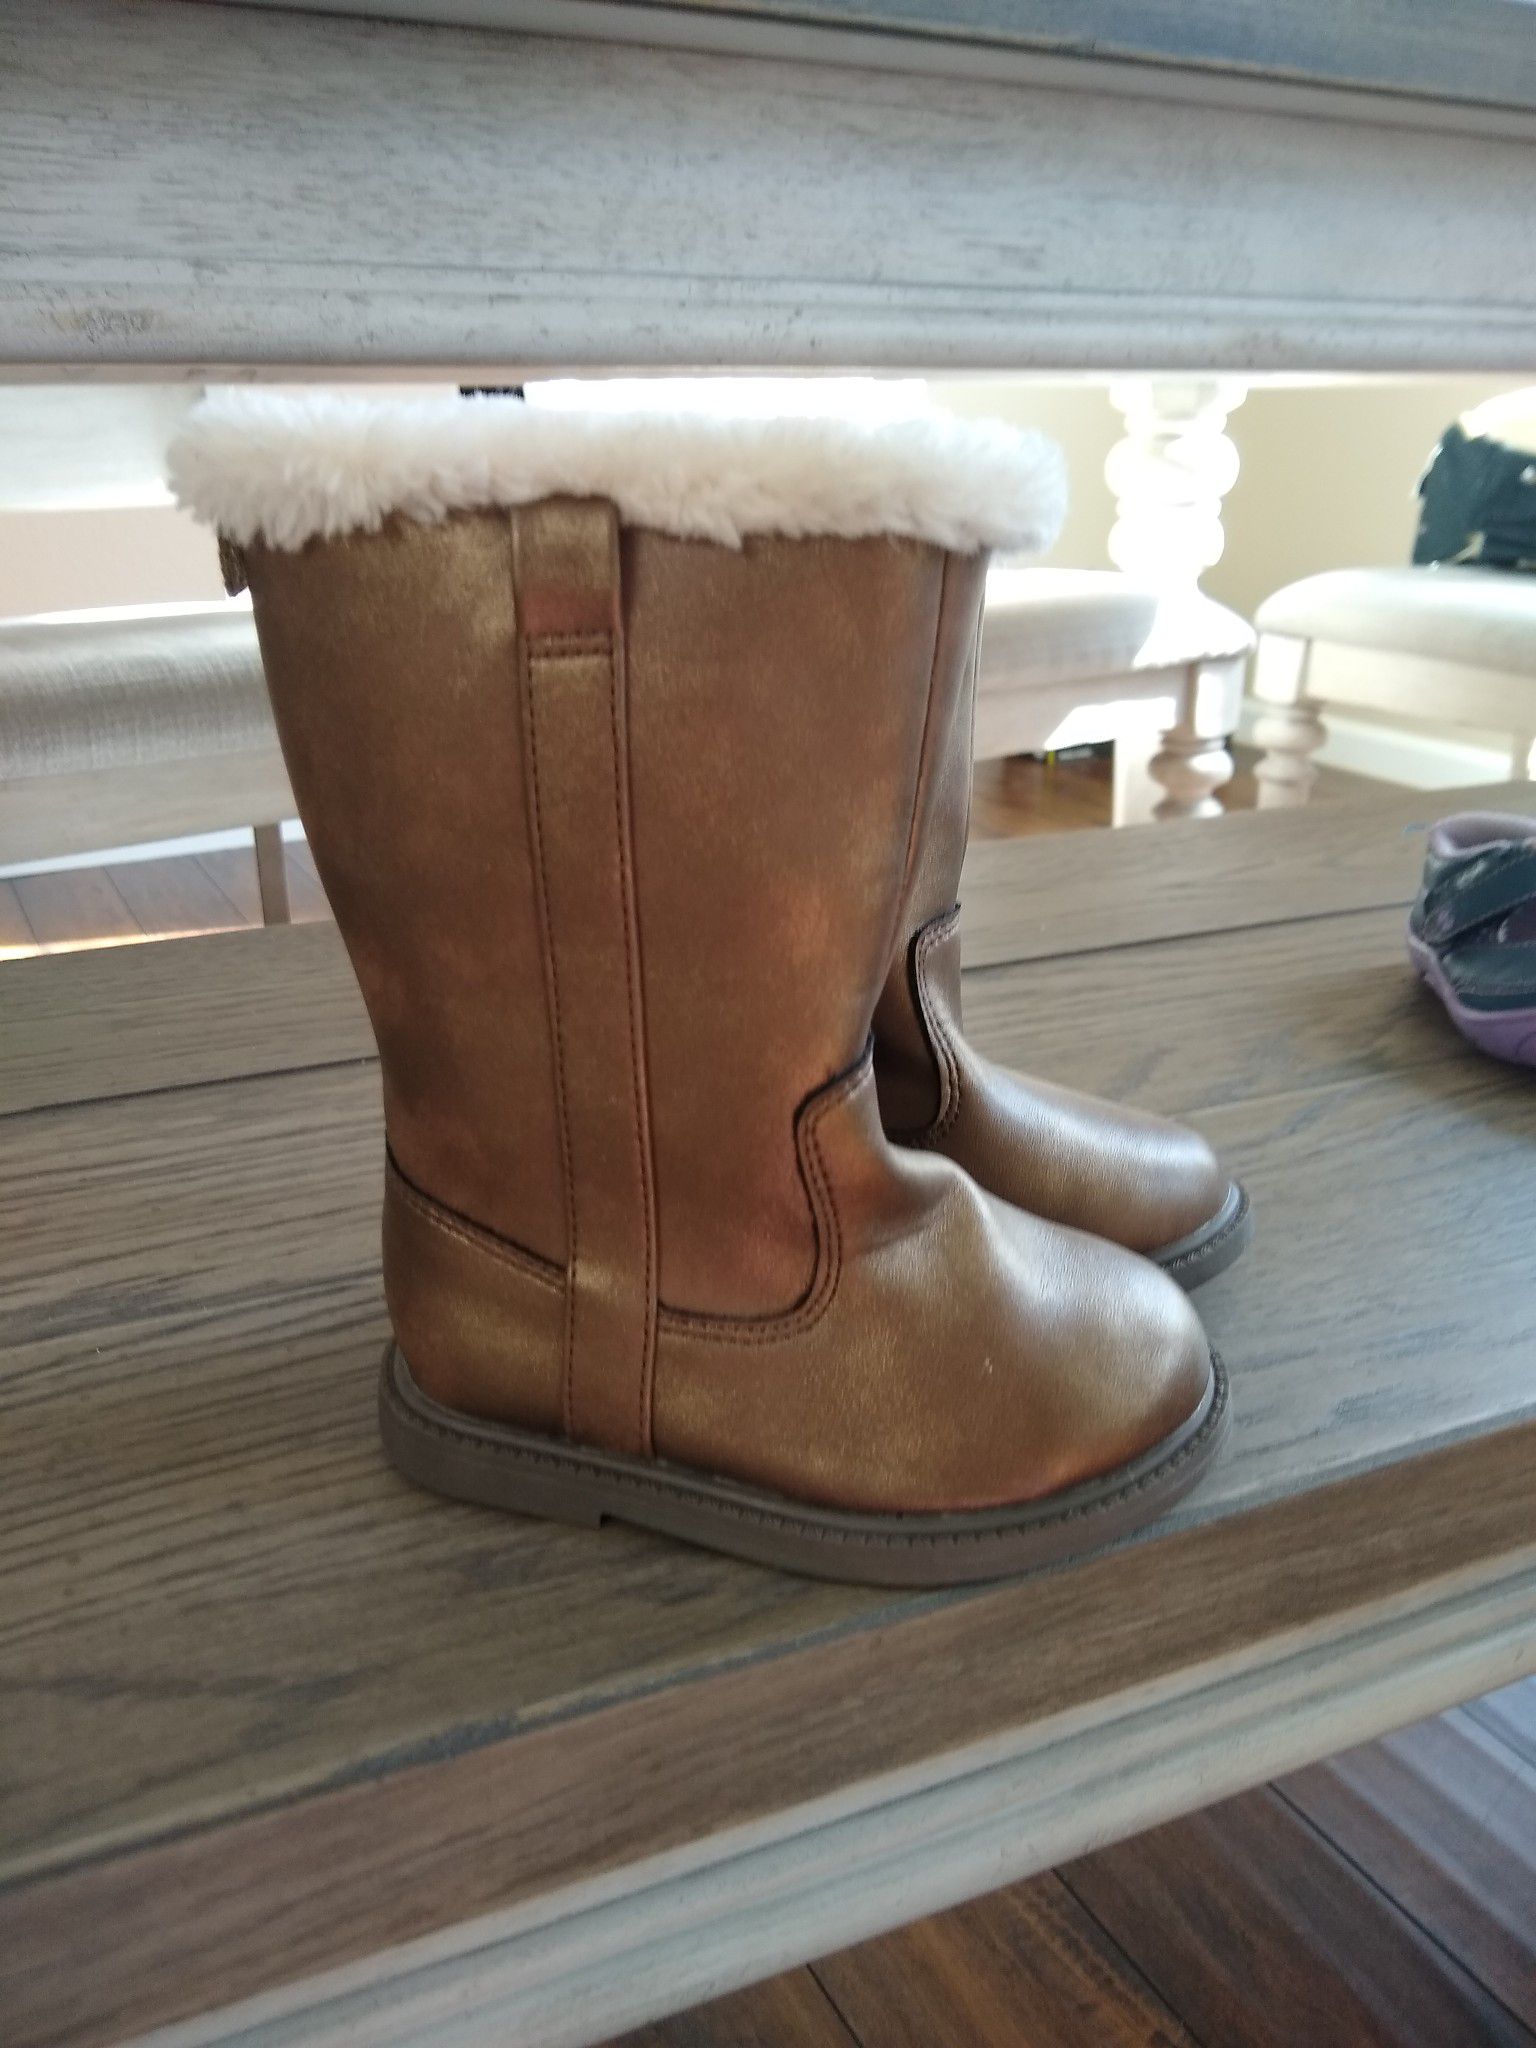 Carter's boots, size 5 toddler